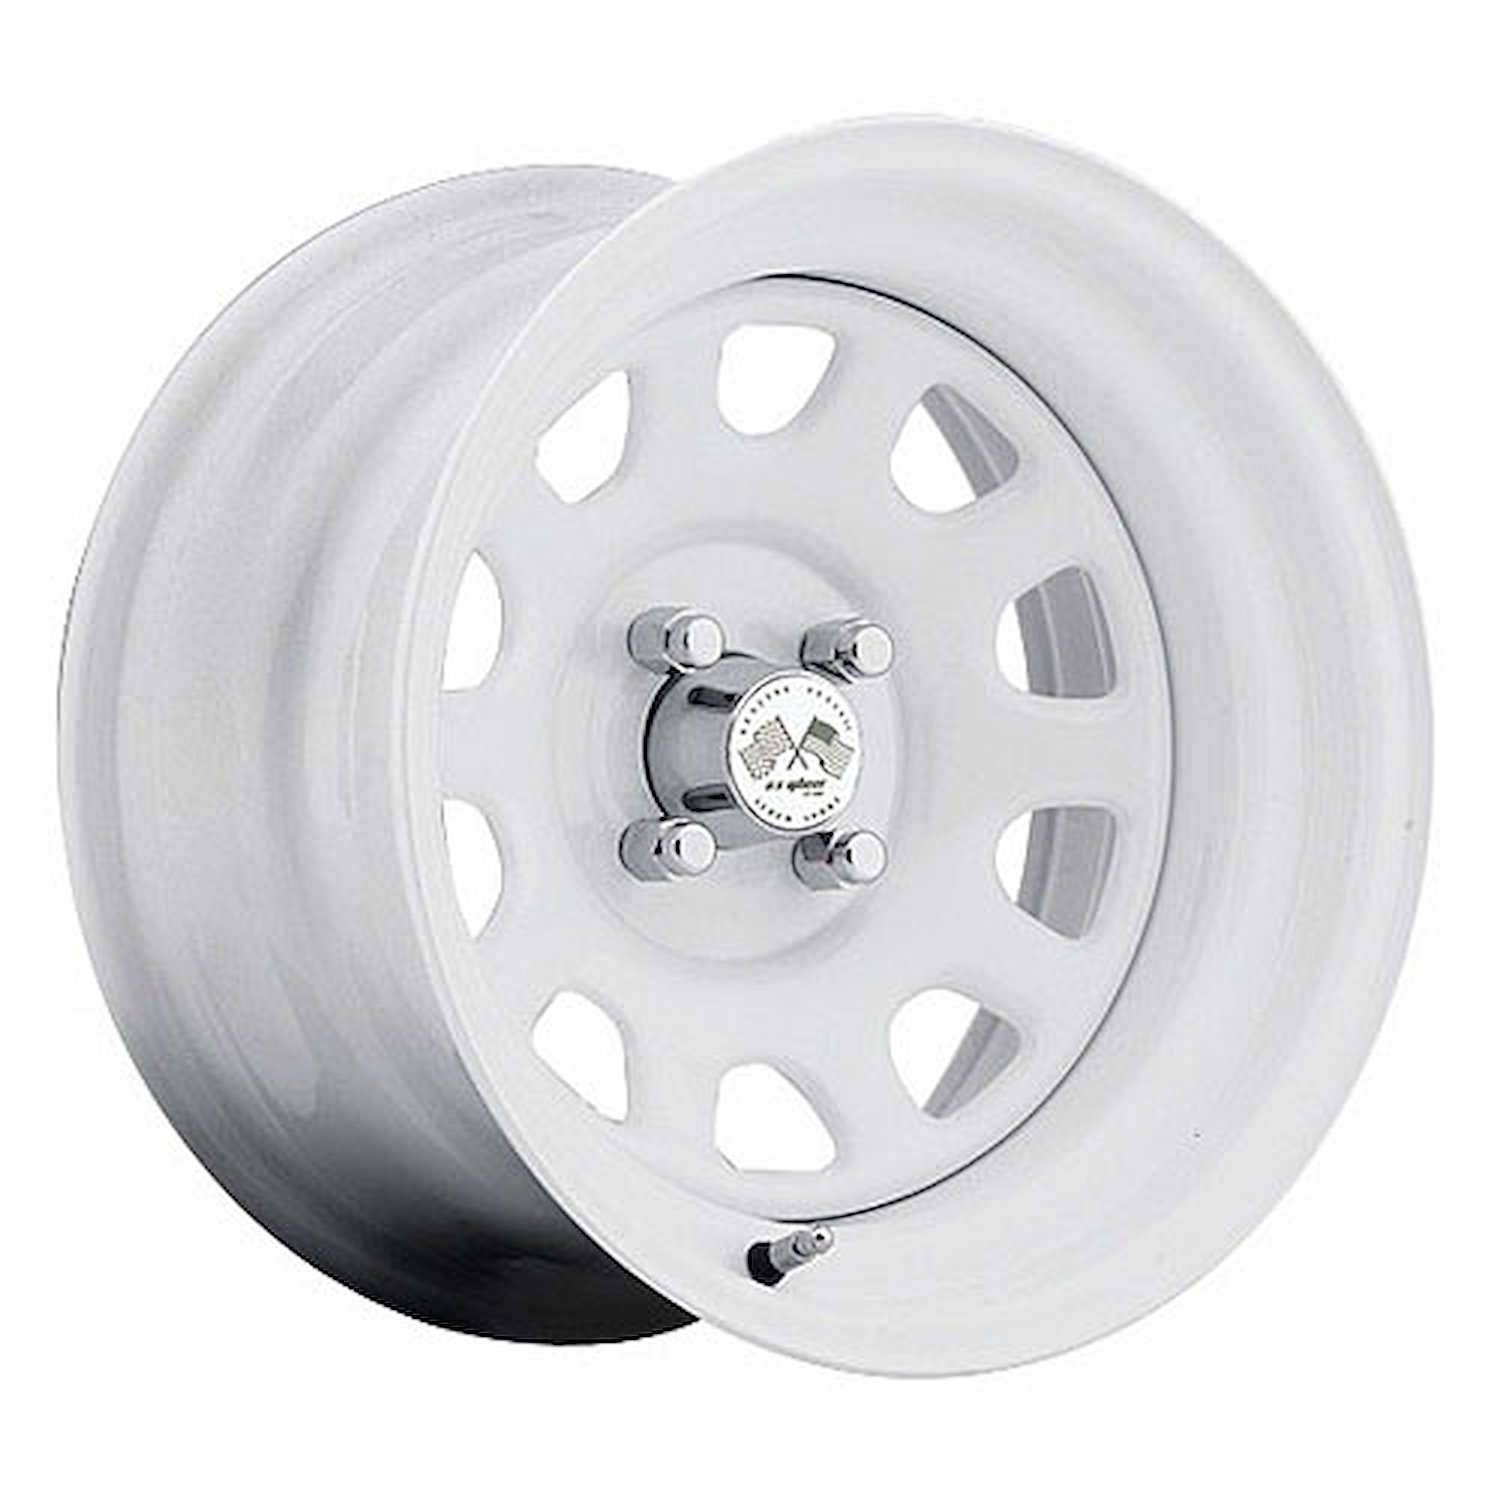 PAINTED DAYTONA FWD DRIFTER WHITE 16 x 8 5 x 45 Bolt Circle 45 Back Spacing 0 offset 266 Center Bore 1400 lbs Load Rating